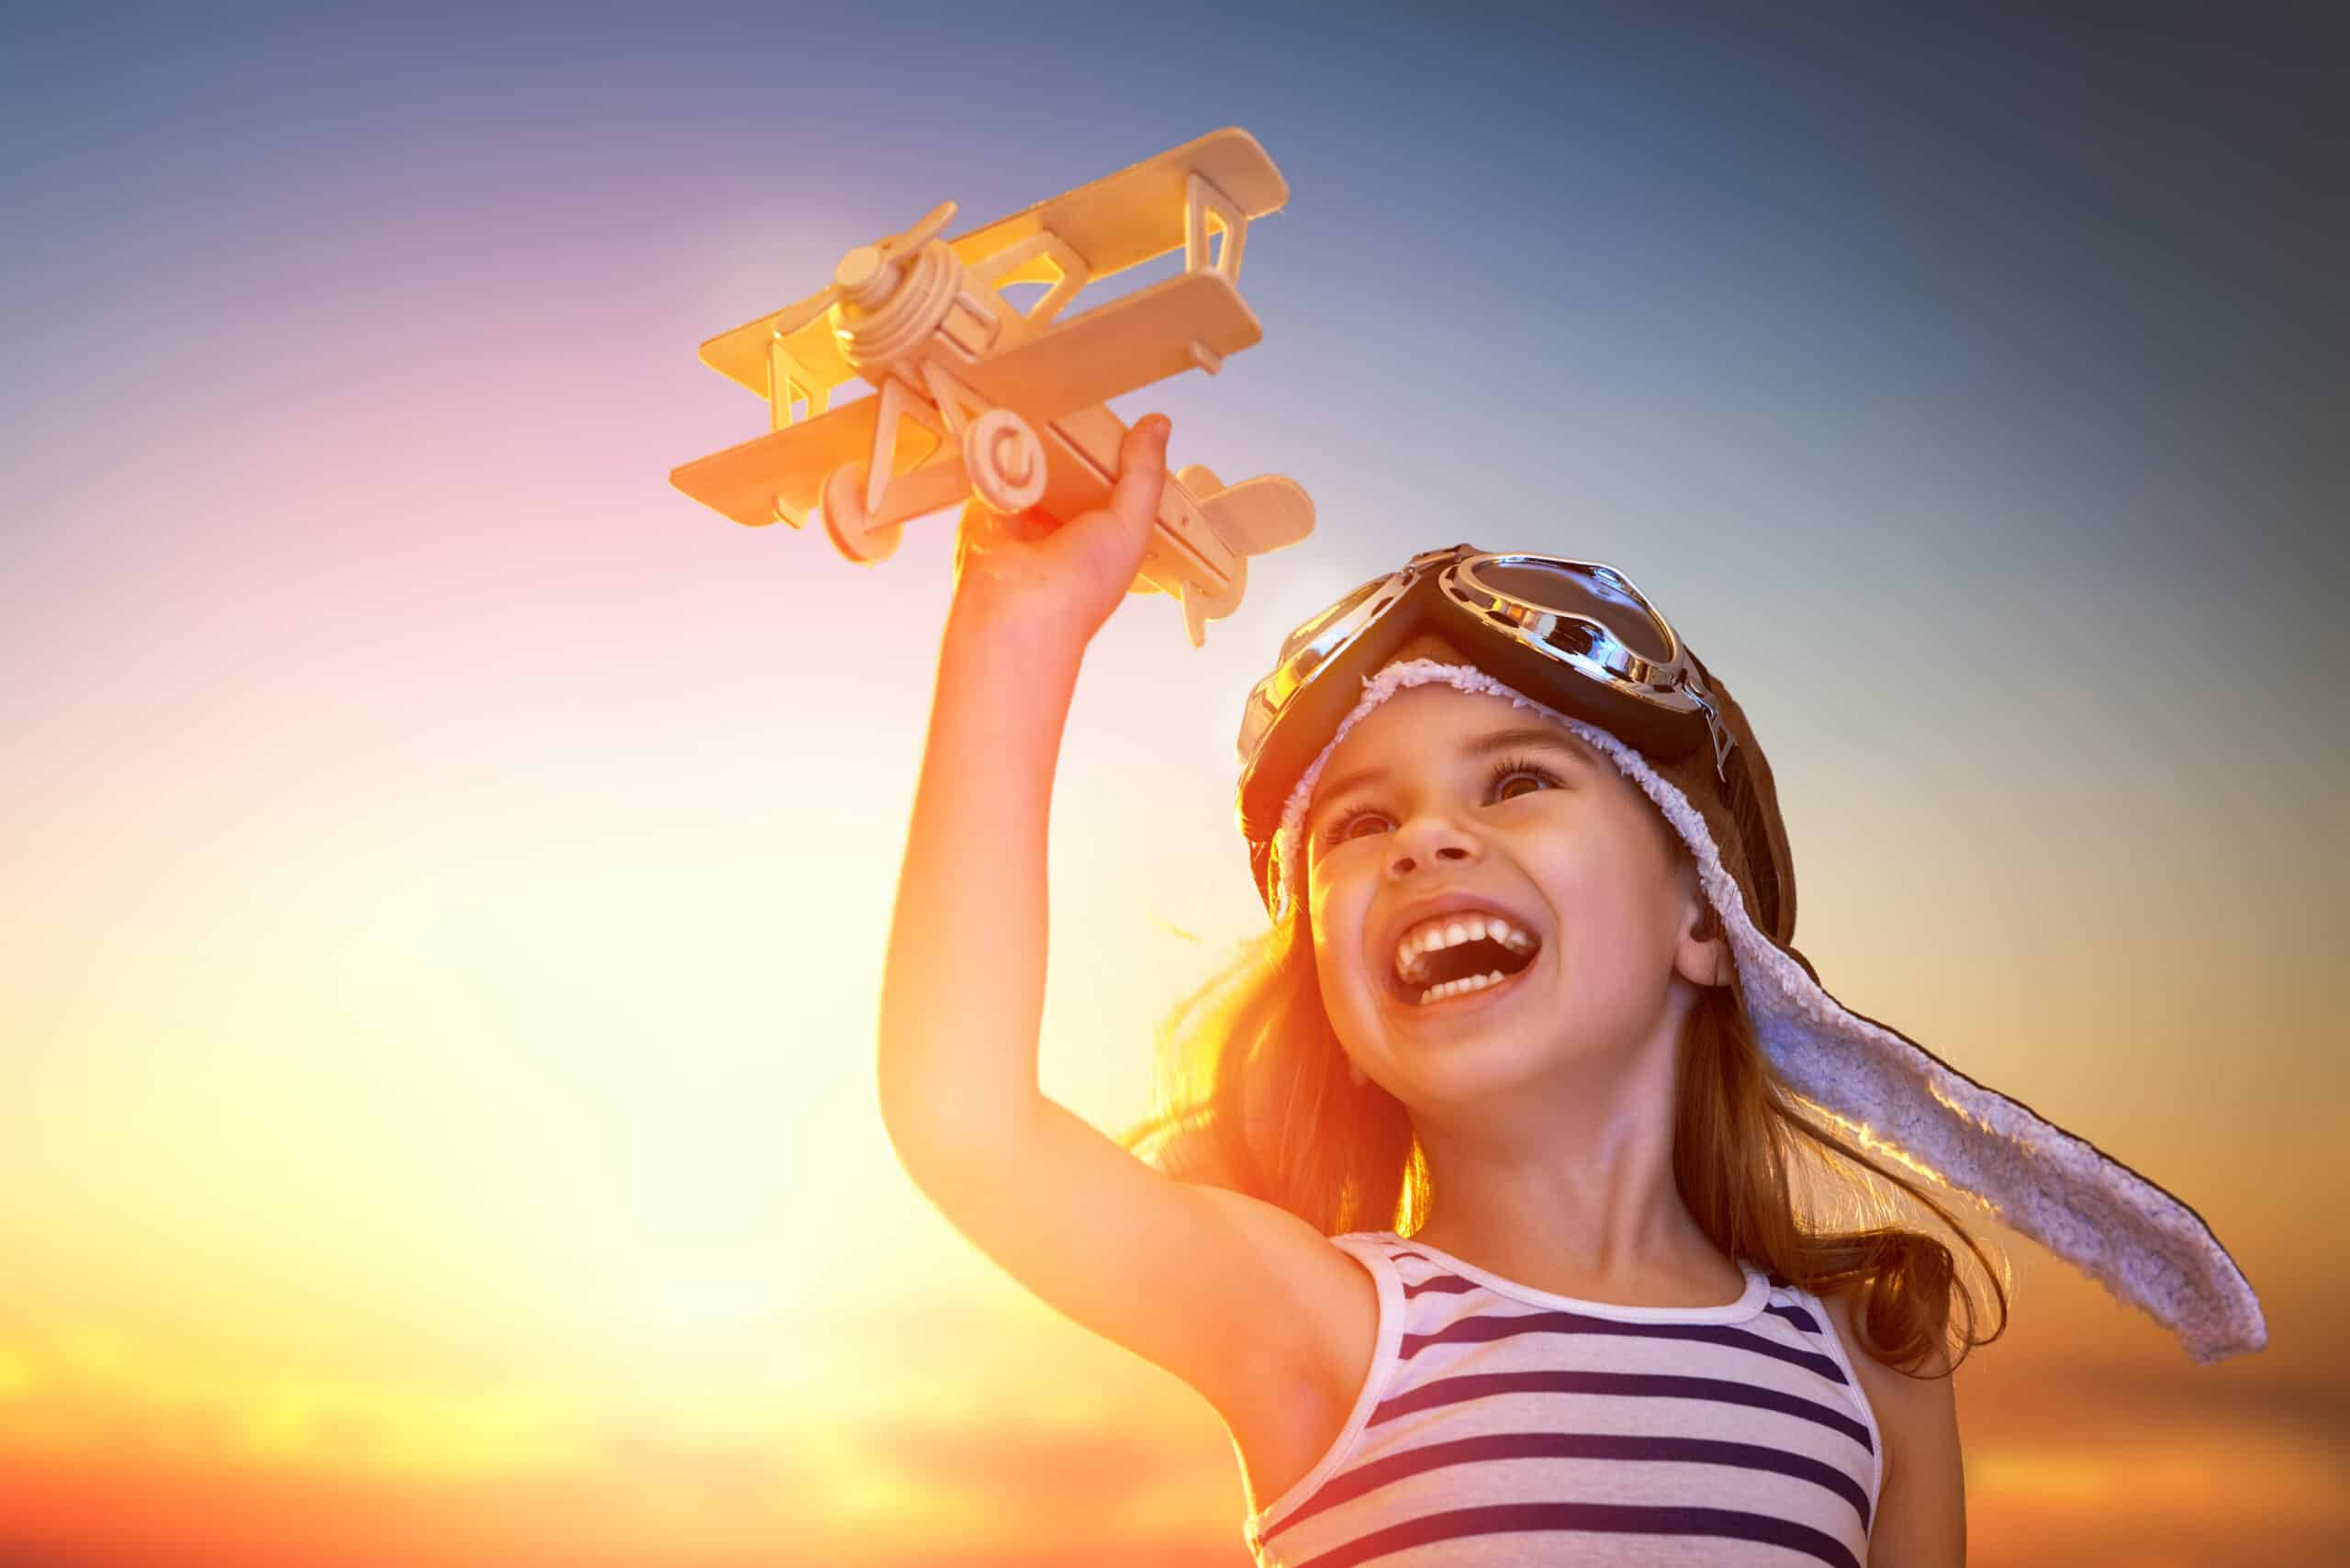 Smiling child playing with a toy airplane